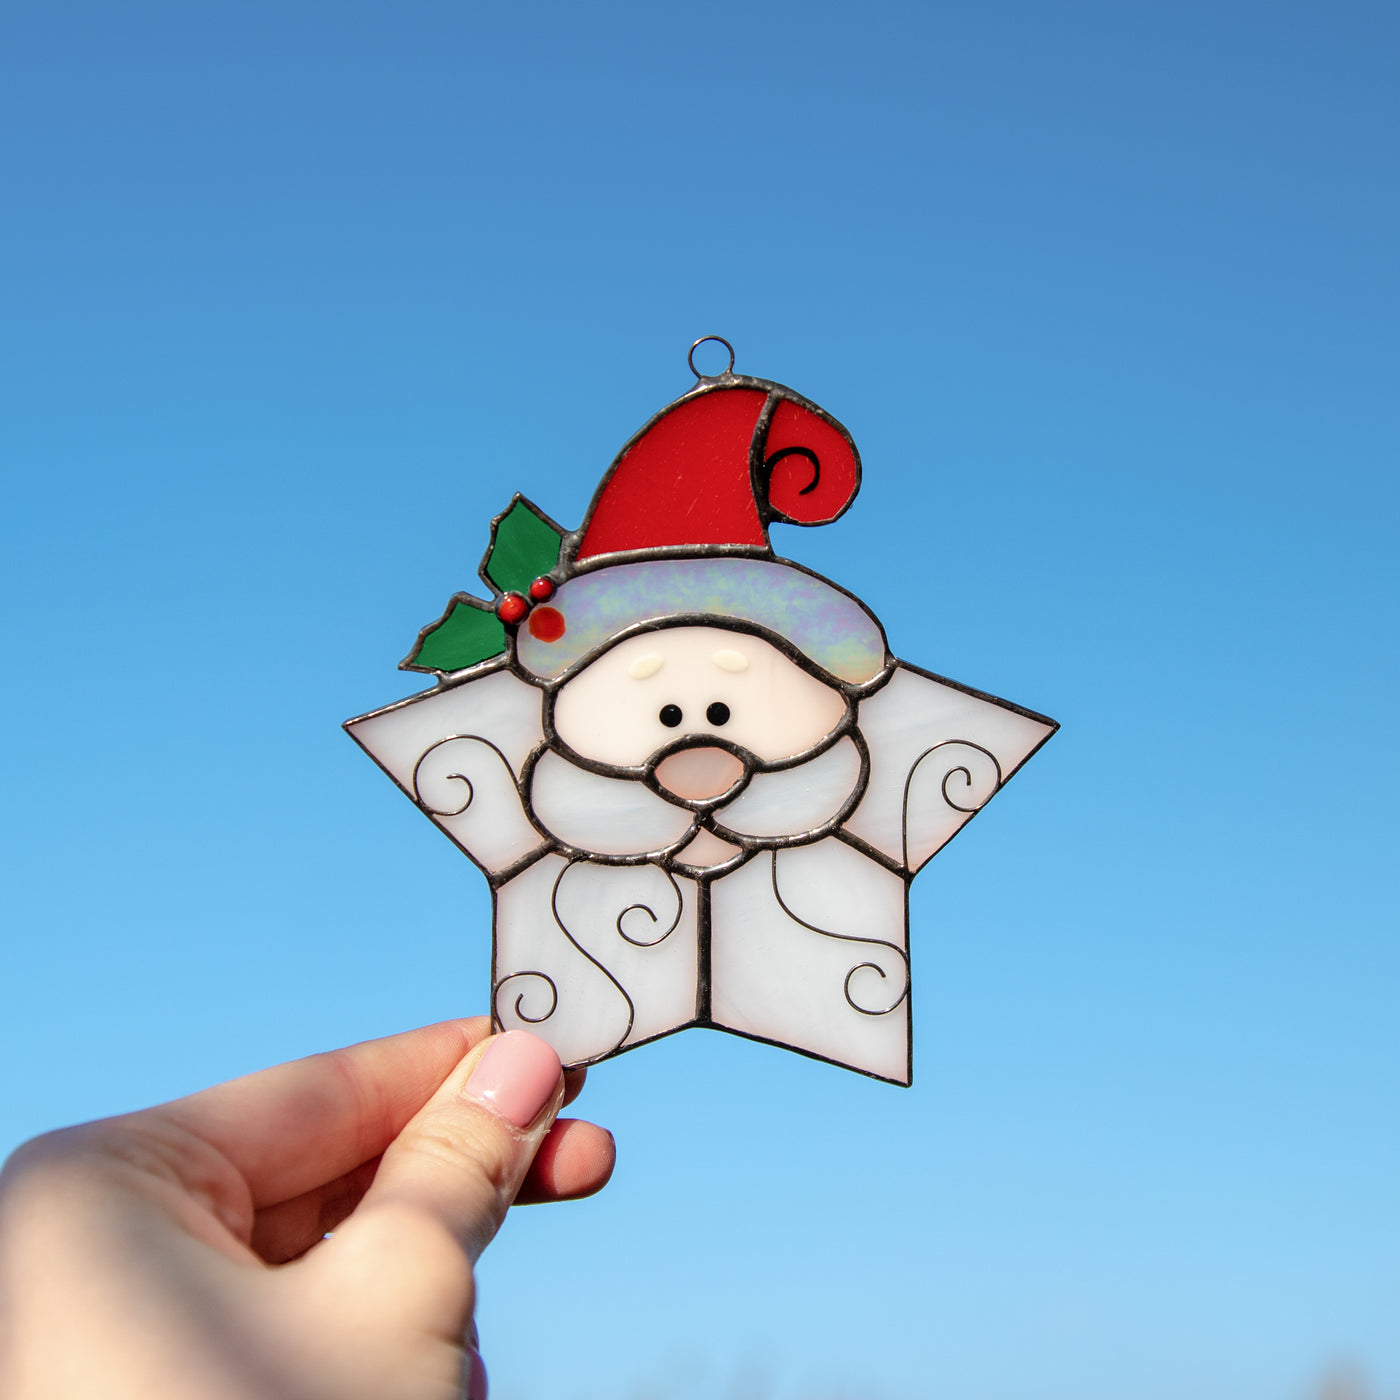 Cute stained glass Santa shaped as a snowflake window hanging